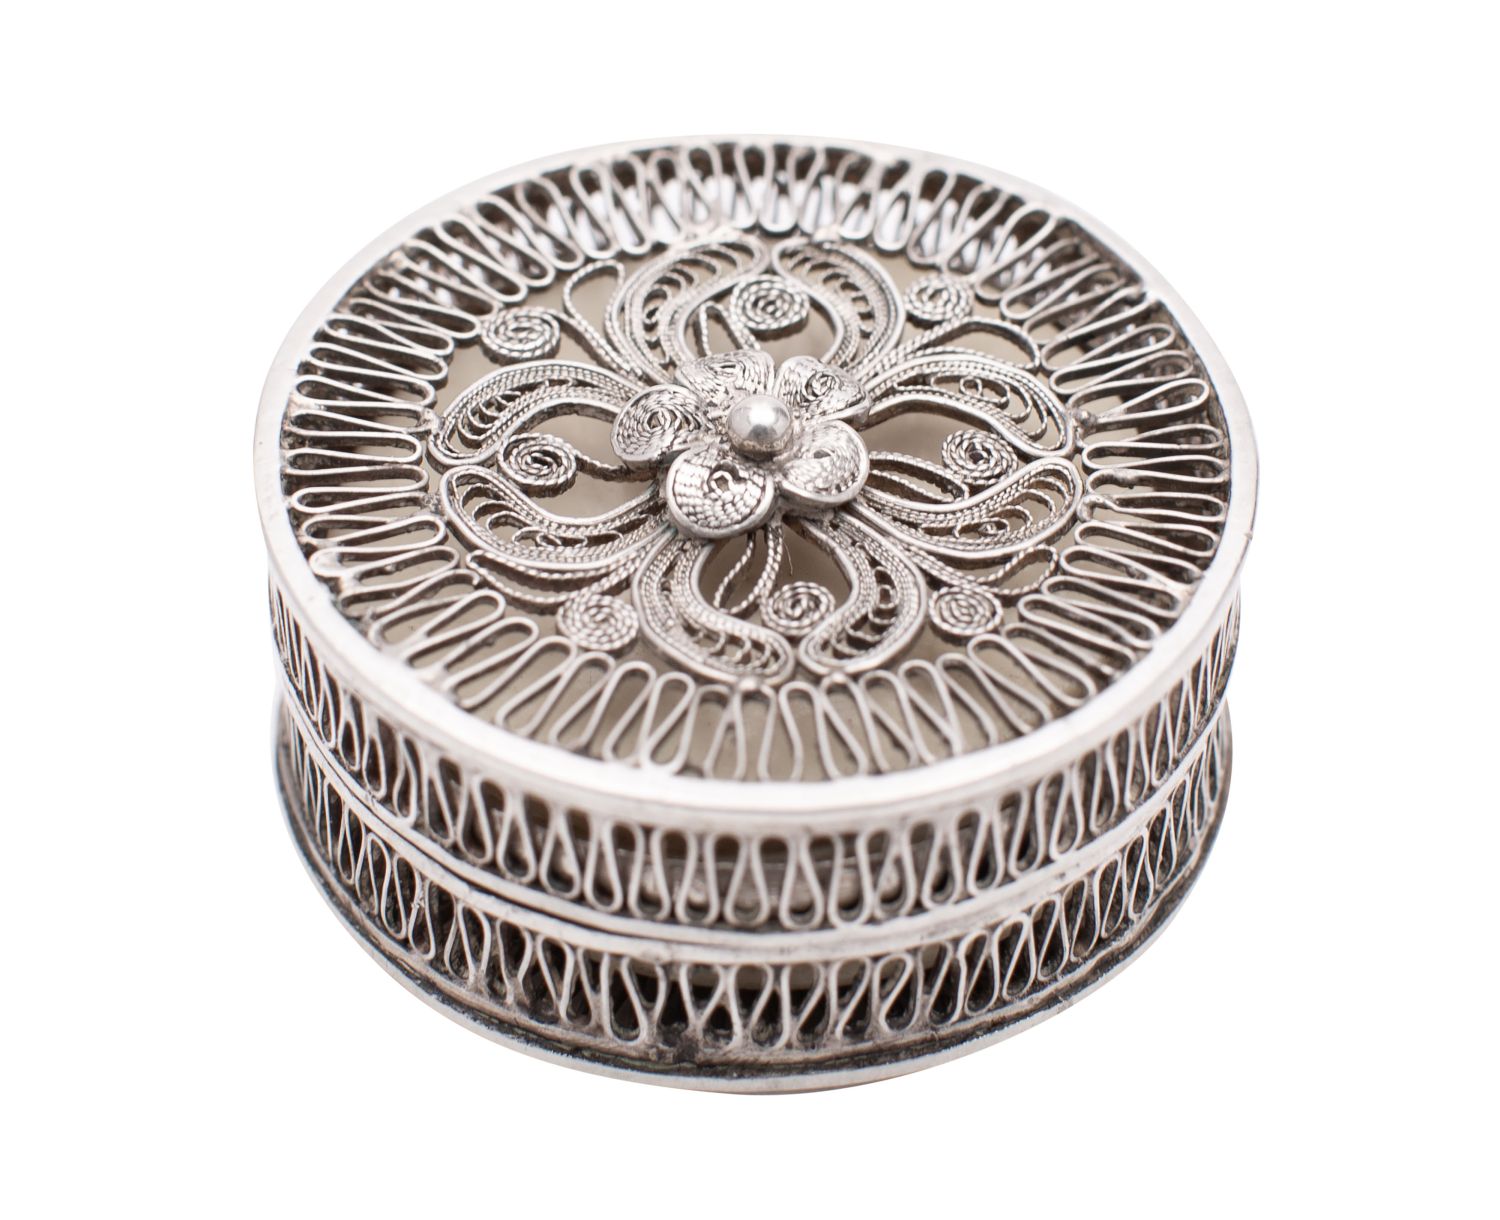 An English silver filigree gaming counter box, un- marked possibly 18th century, of circular form,